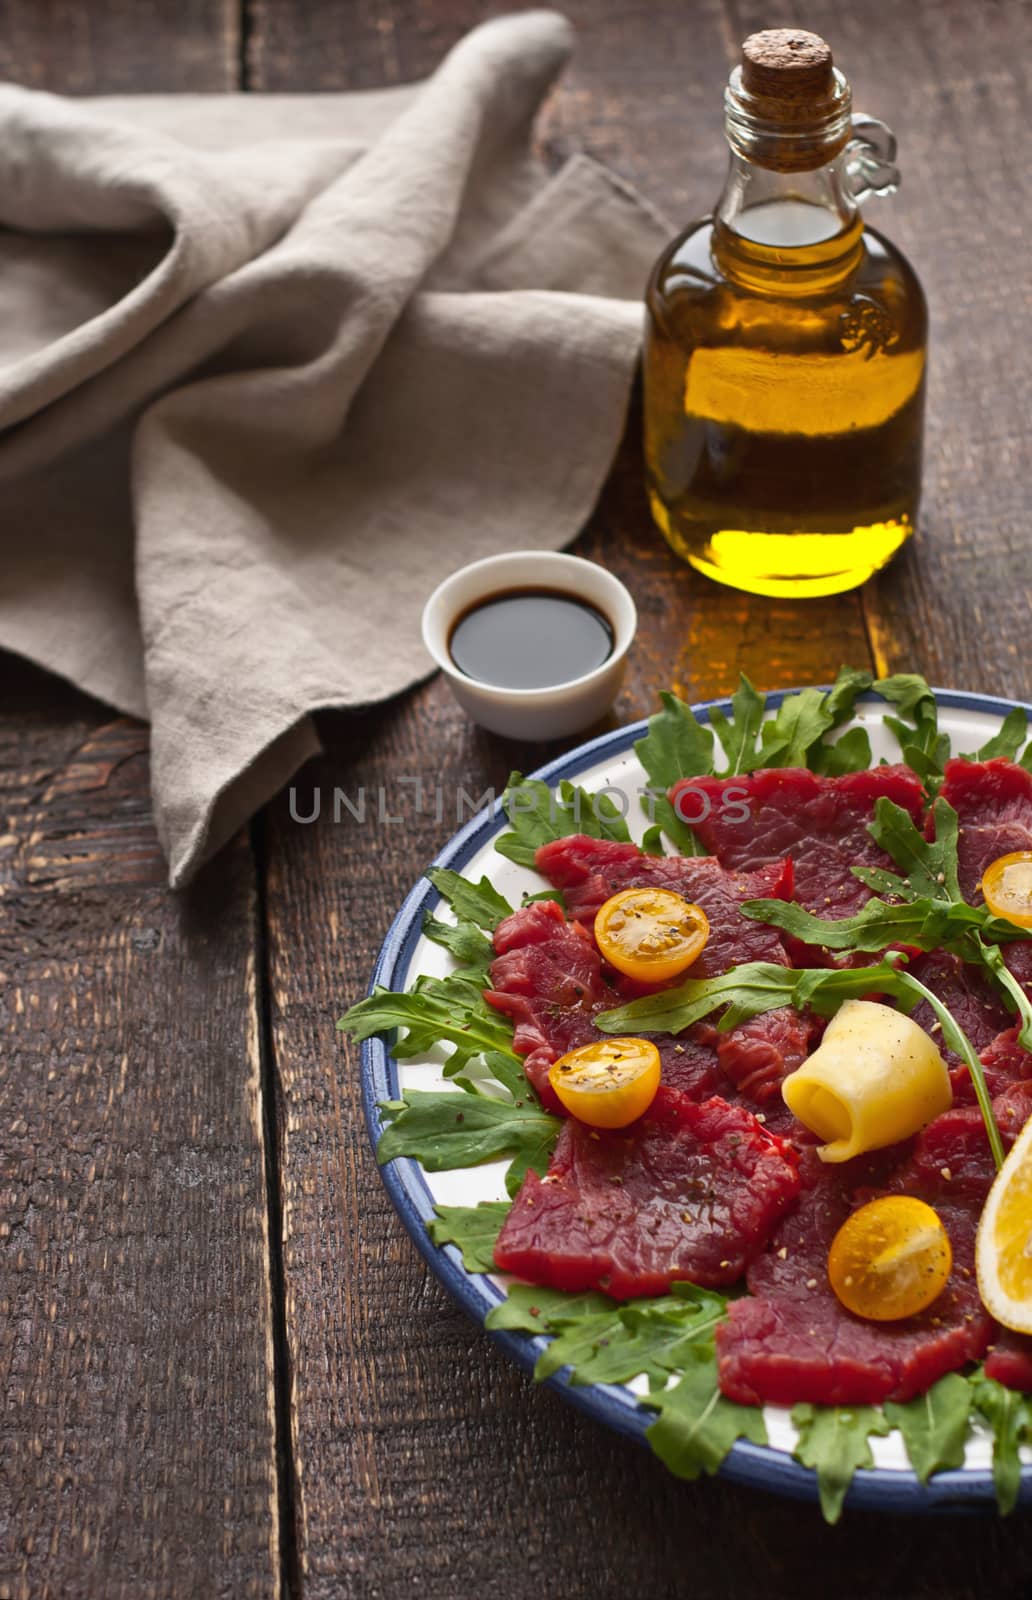 Carpaccio with arugula, tomatoes and cheese on the rustic table